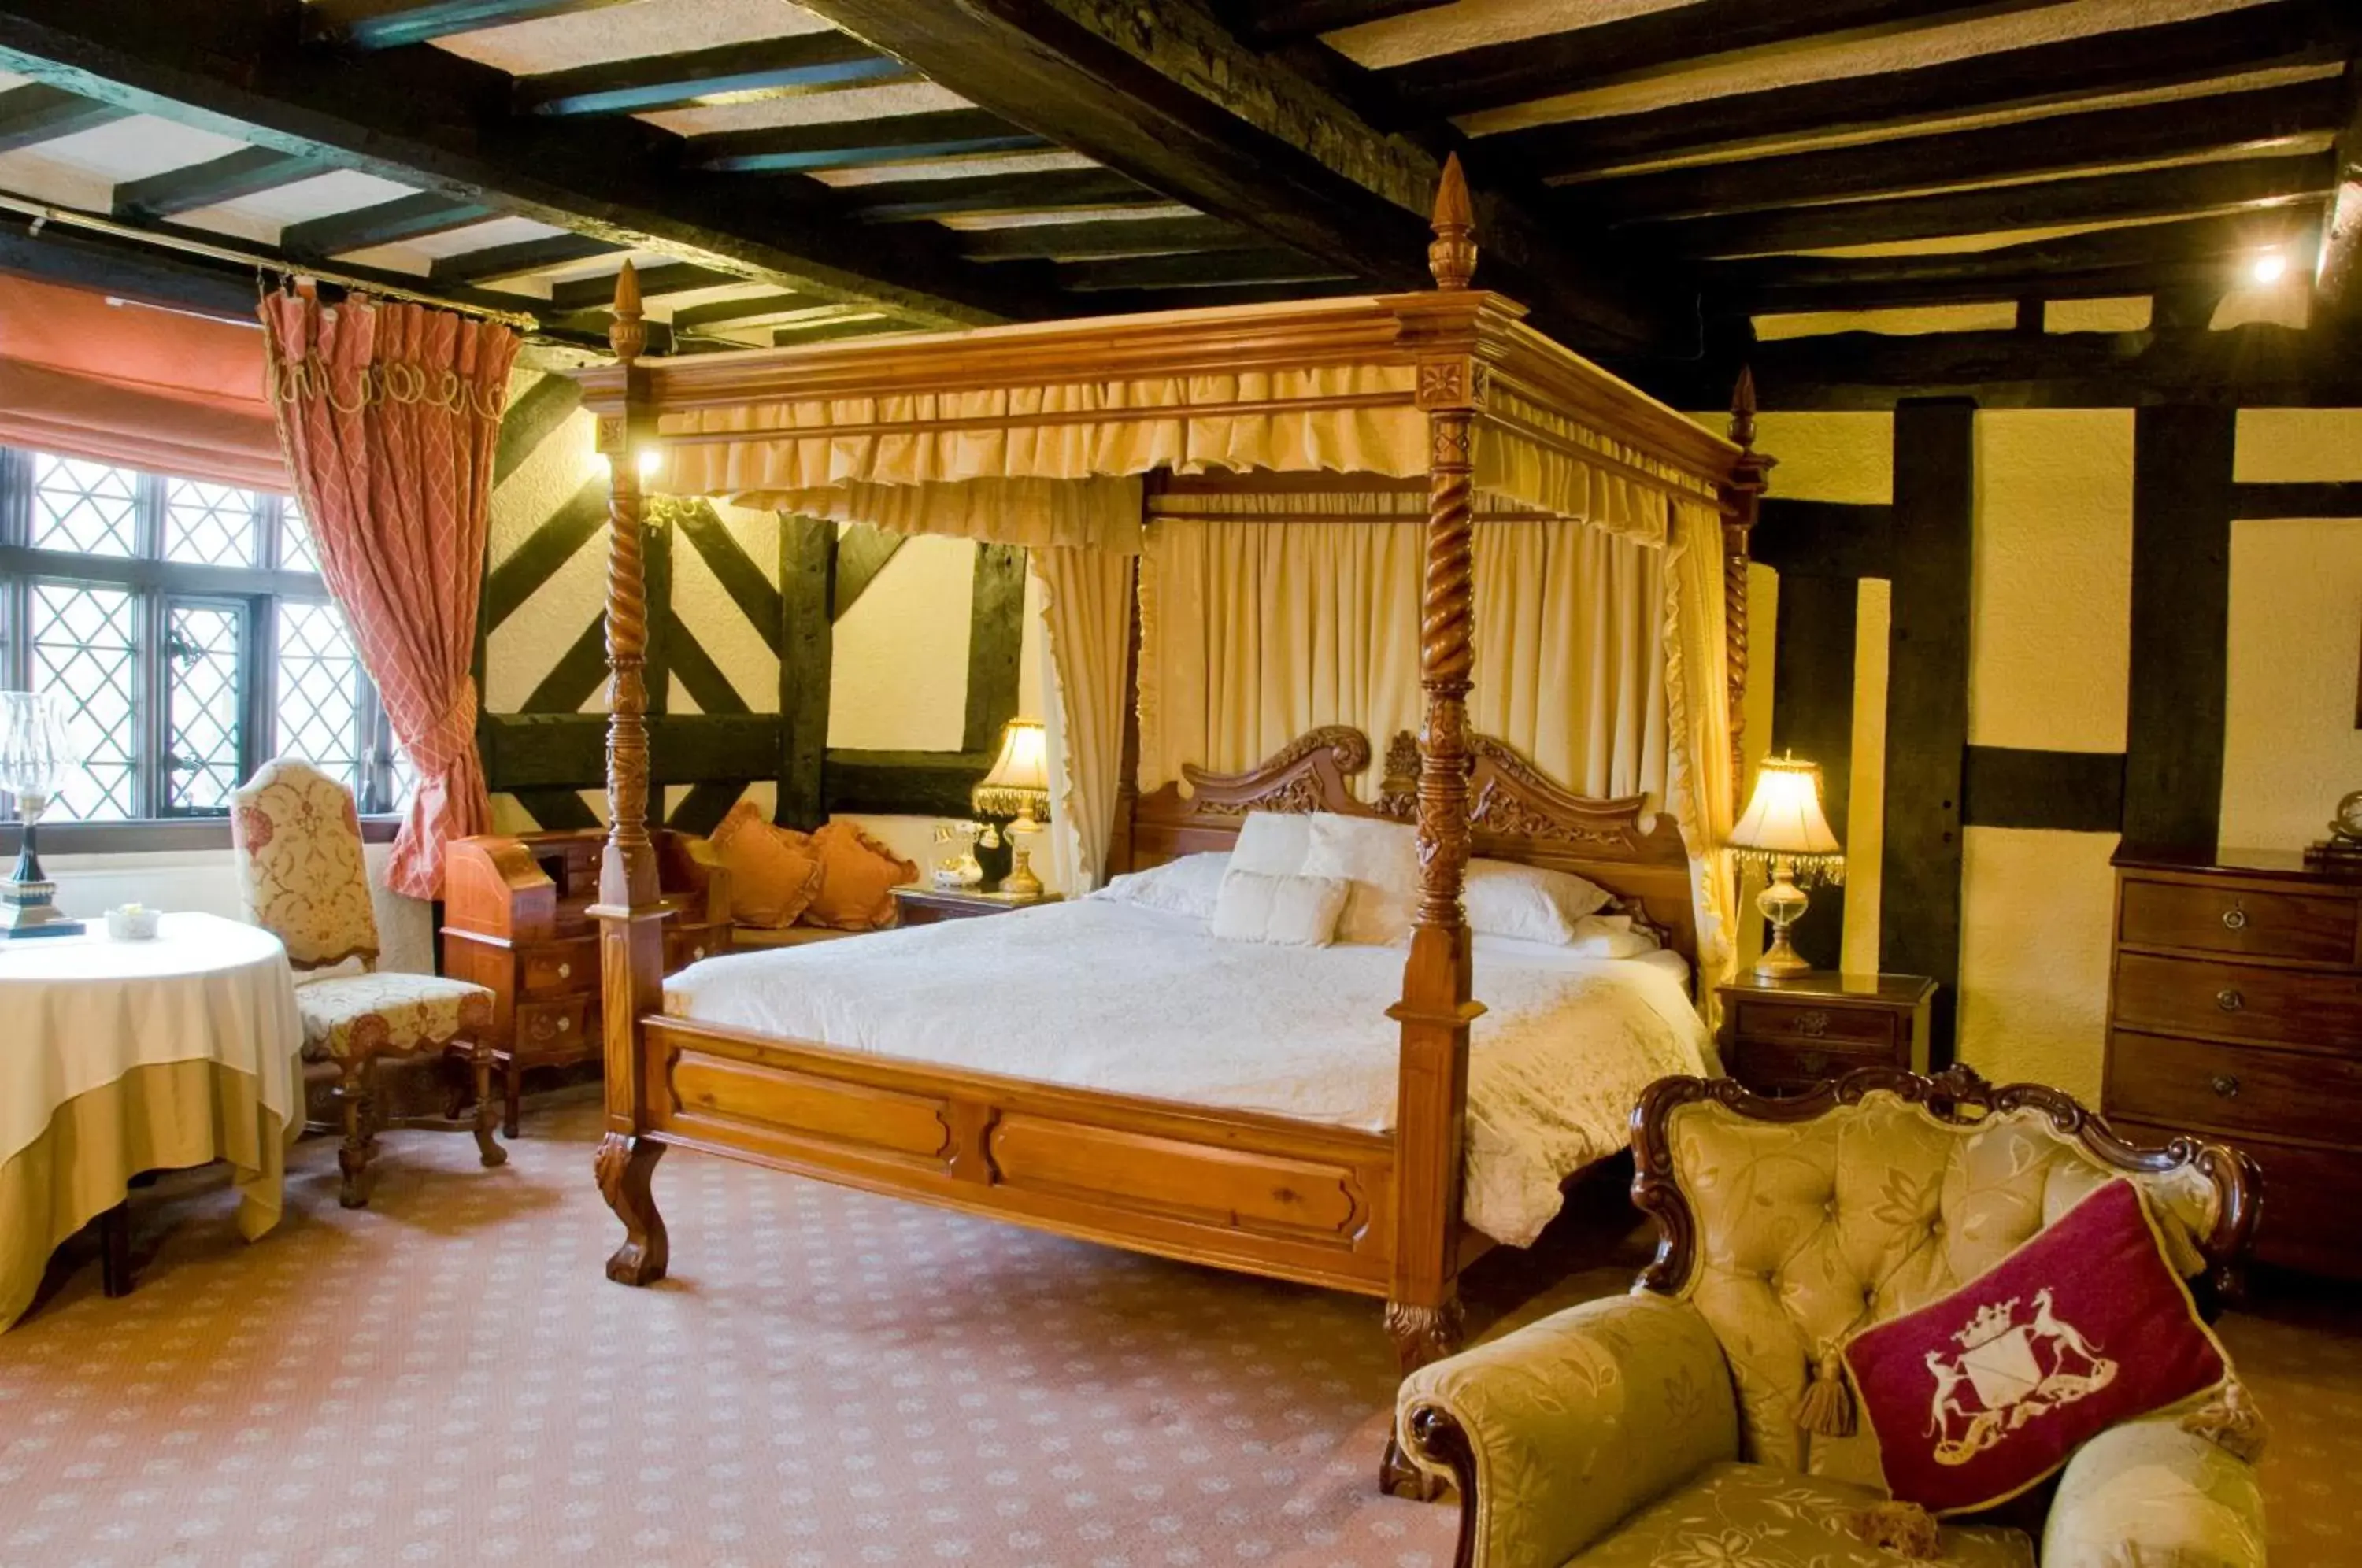 Bed in Albright Hussey Manor